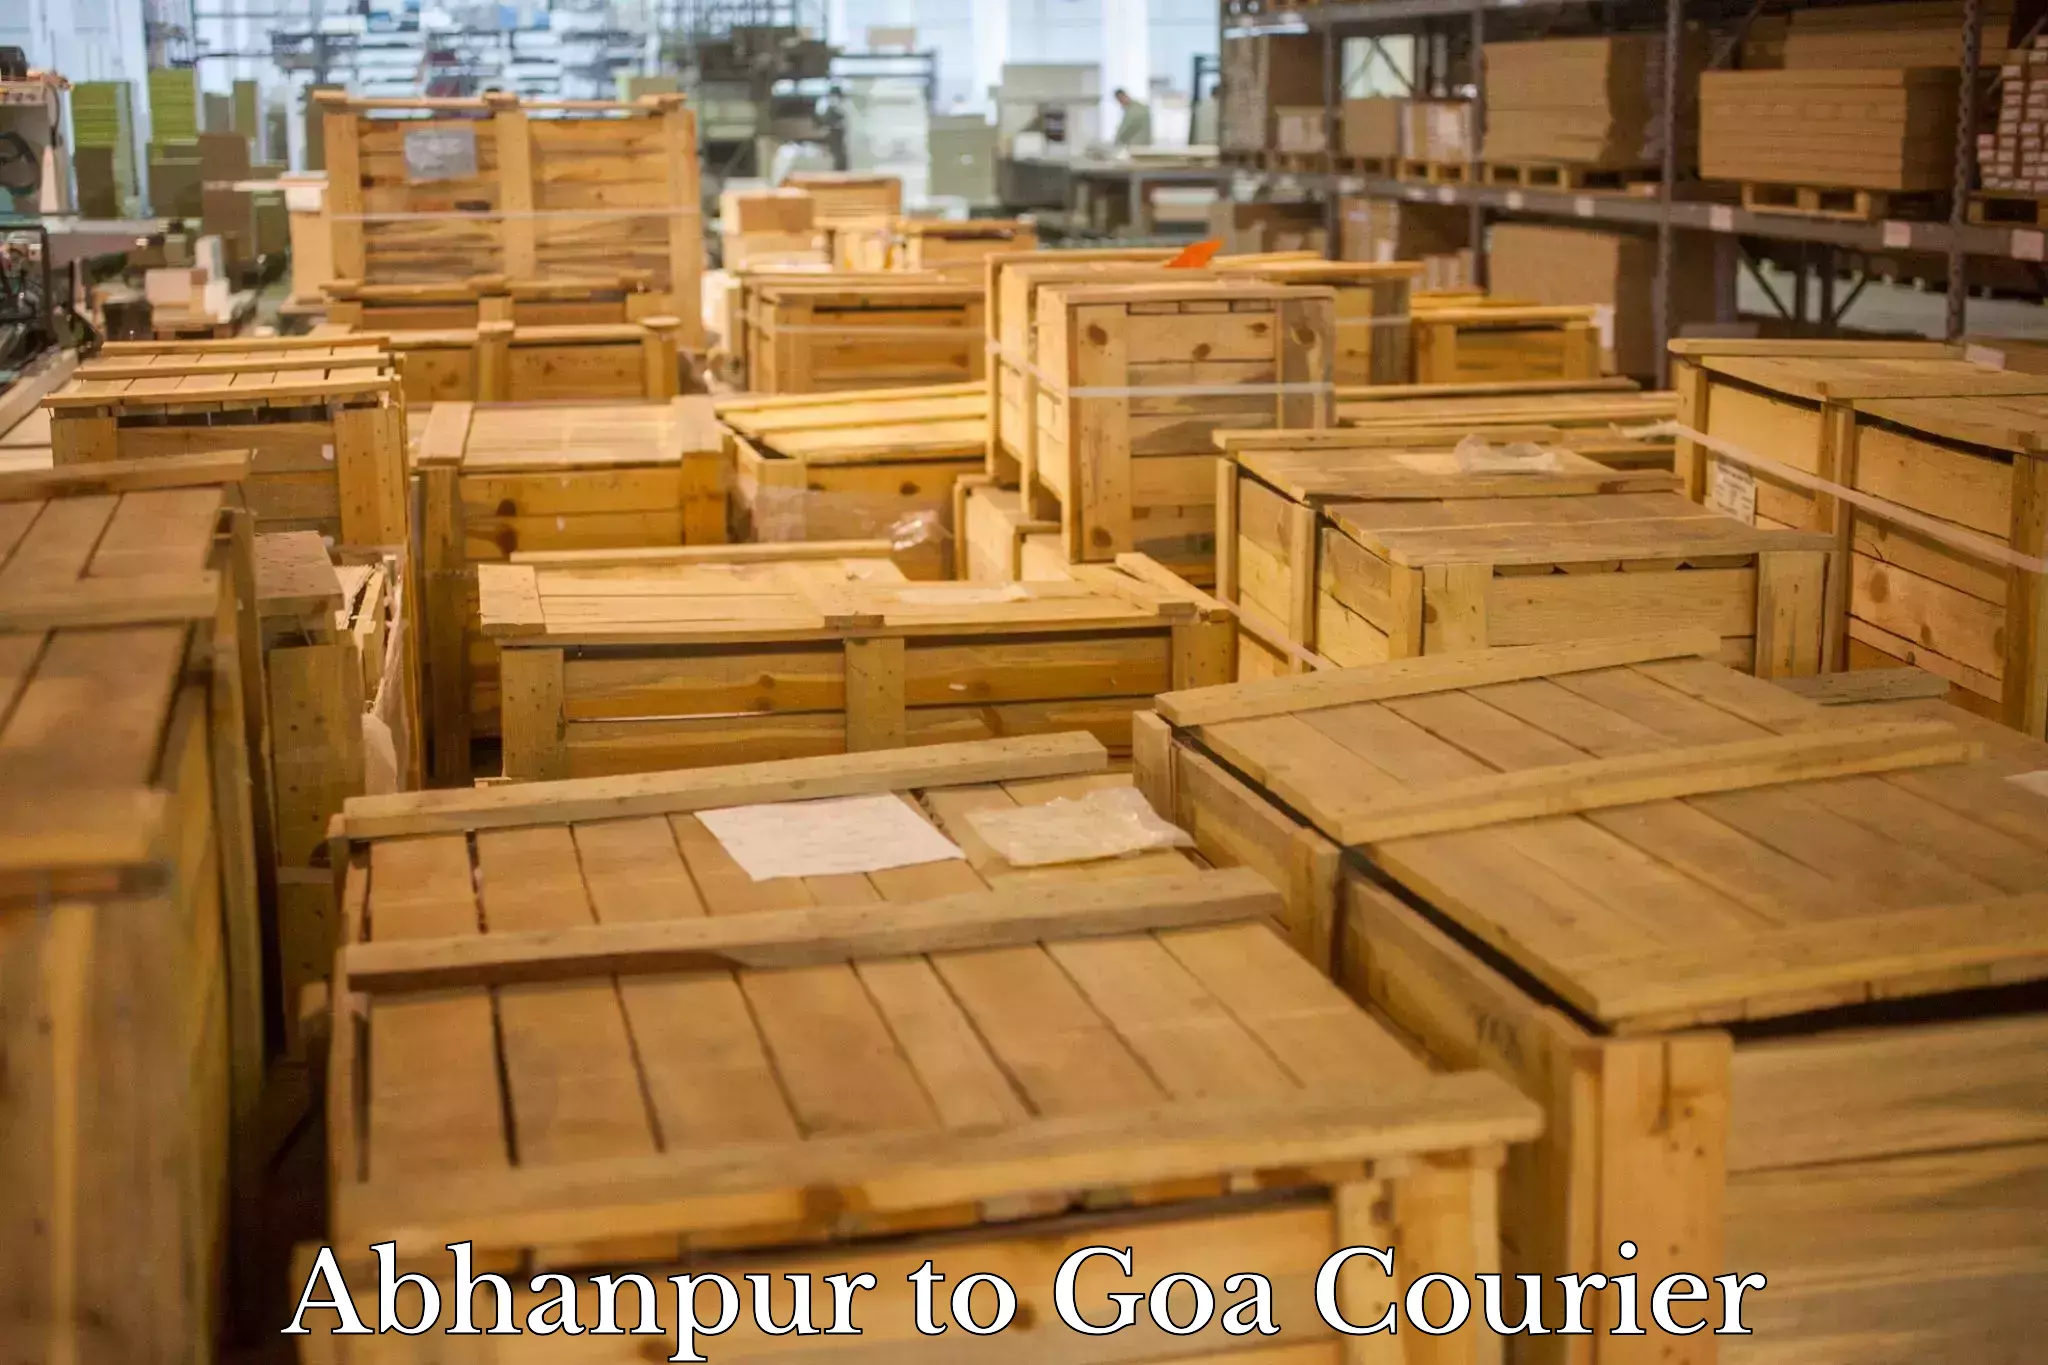 Business delivery service Abhanpur to Goa